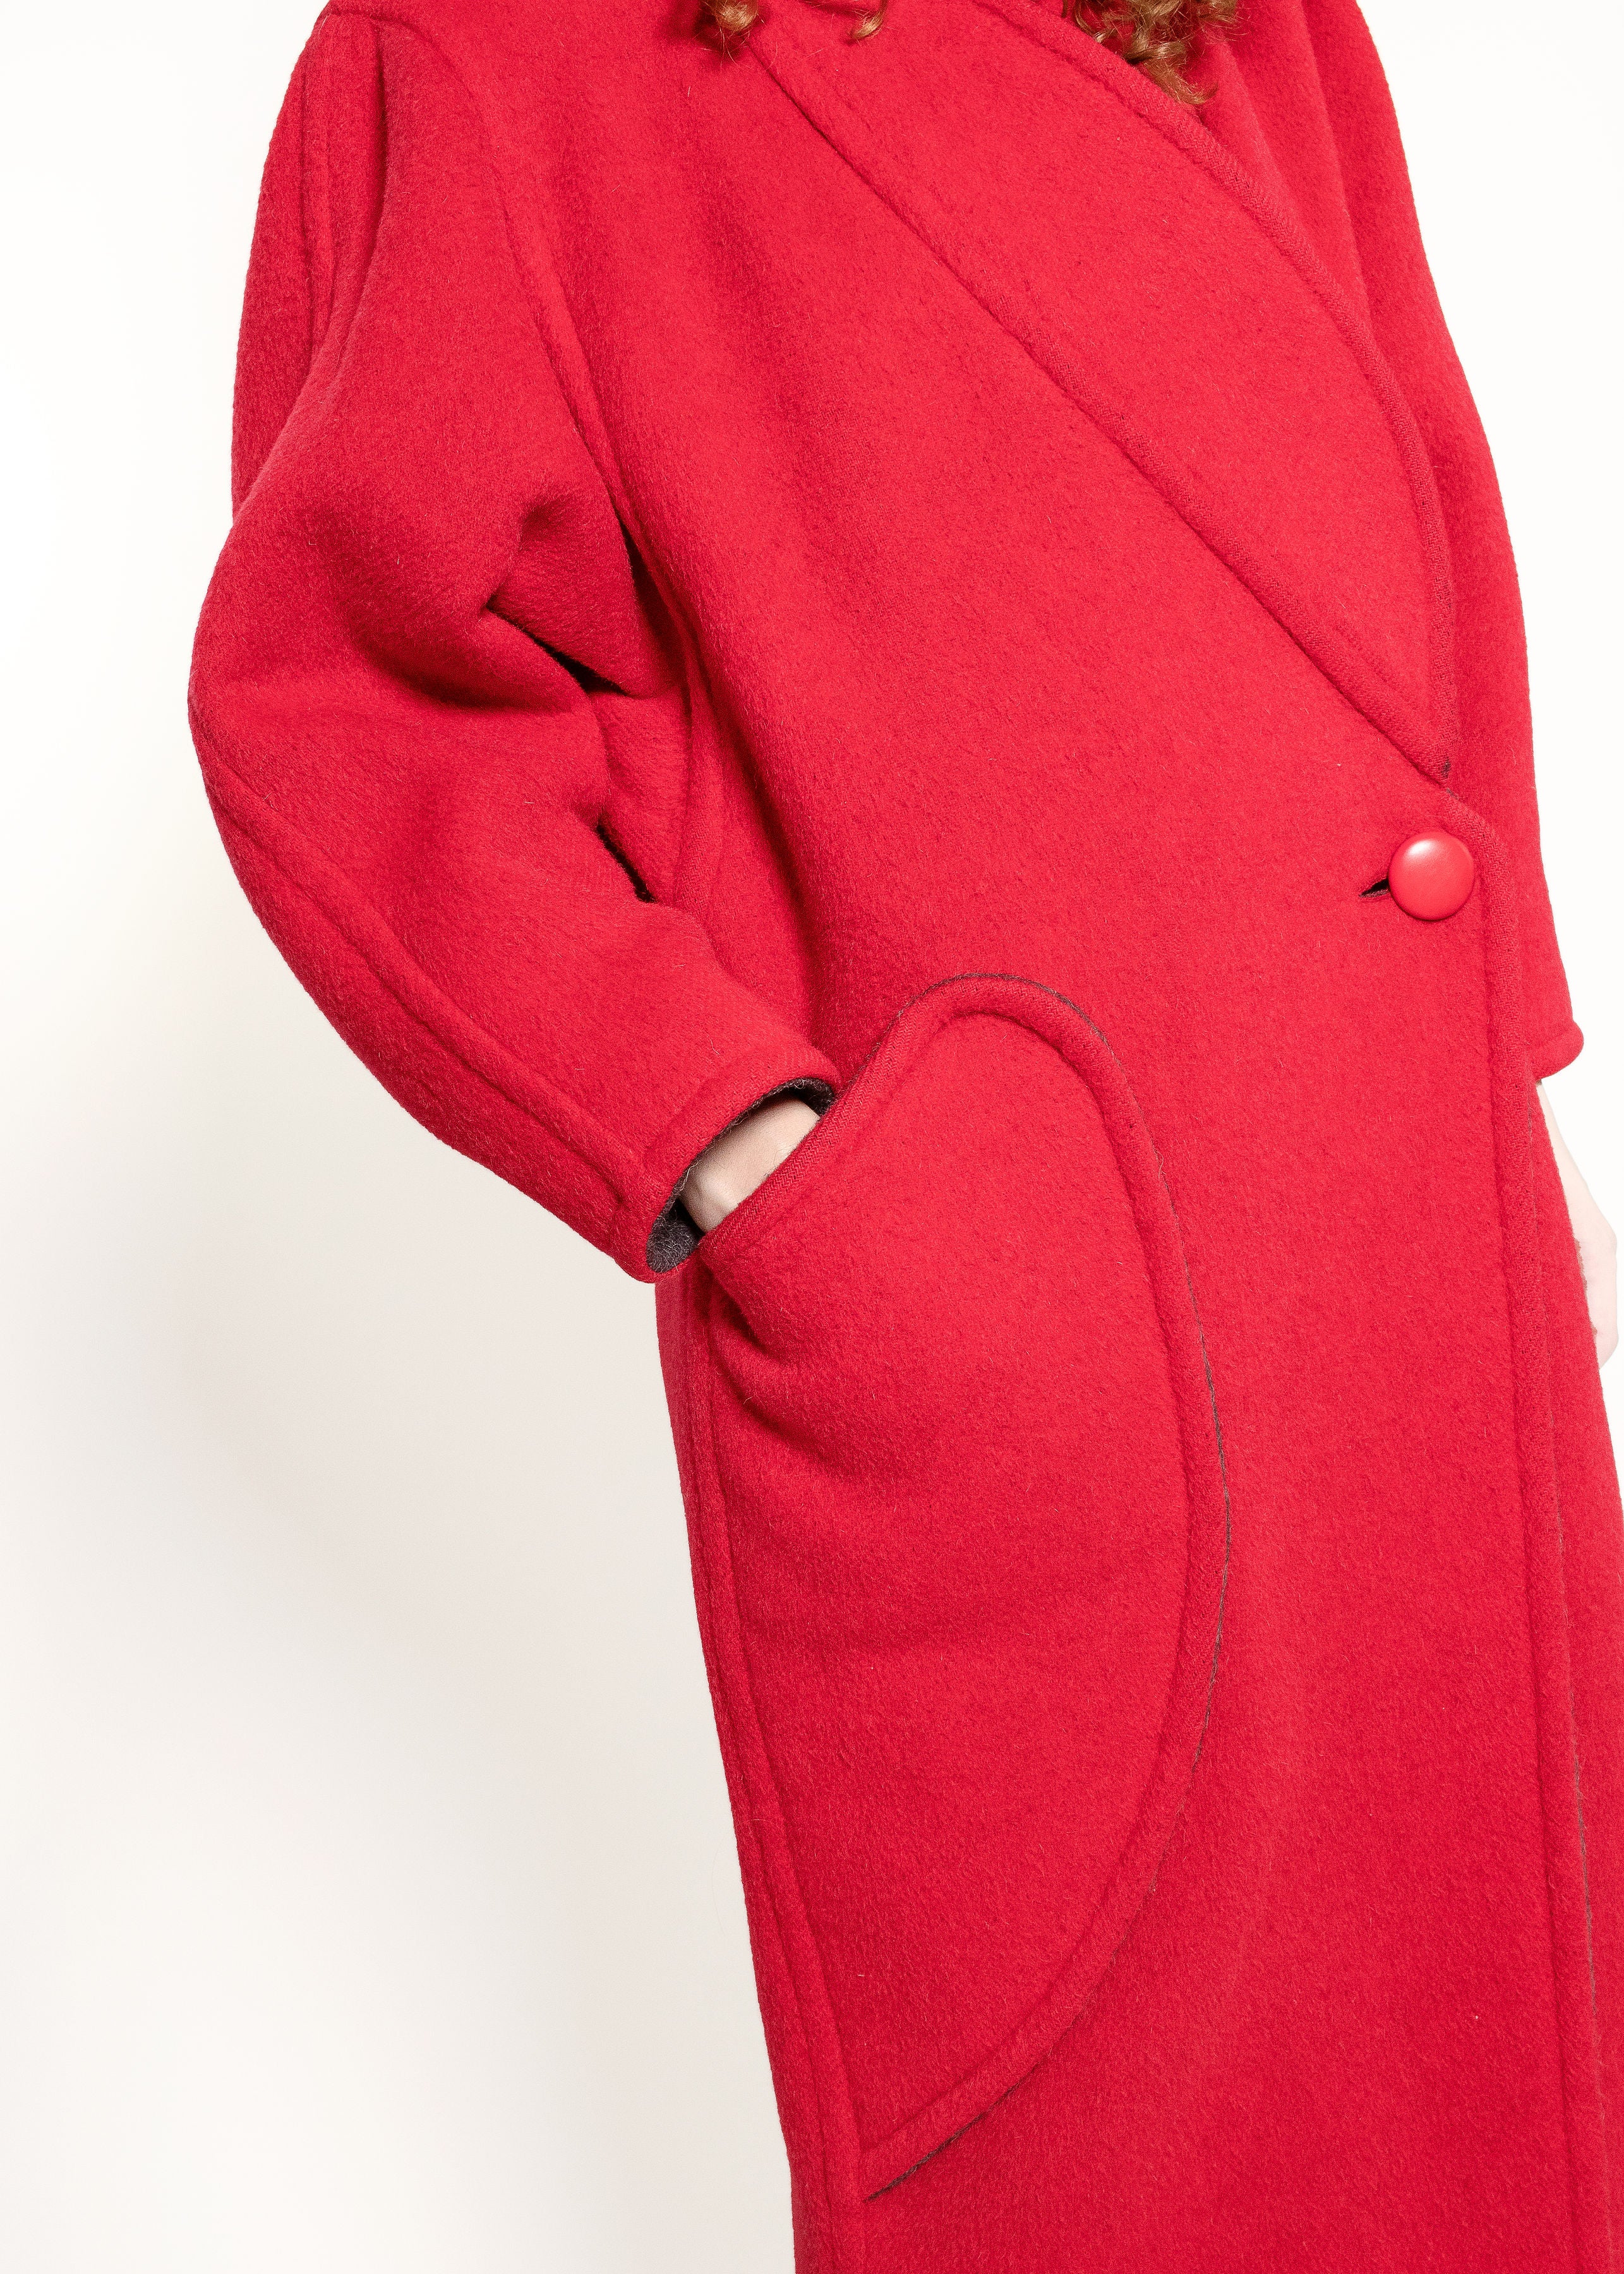 Courreges Red Wool Coat